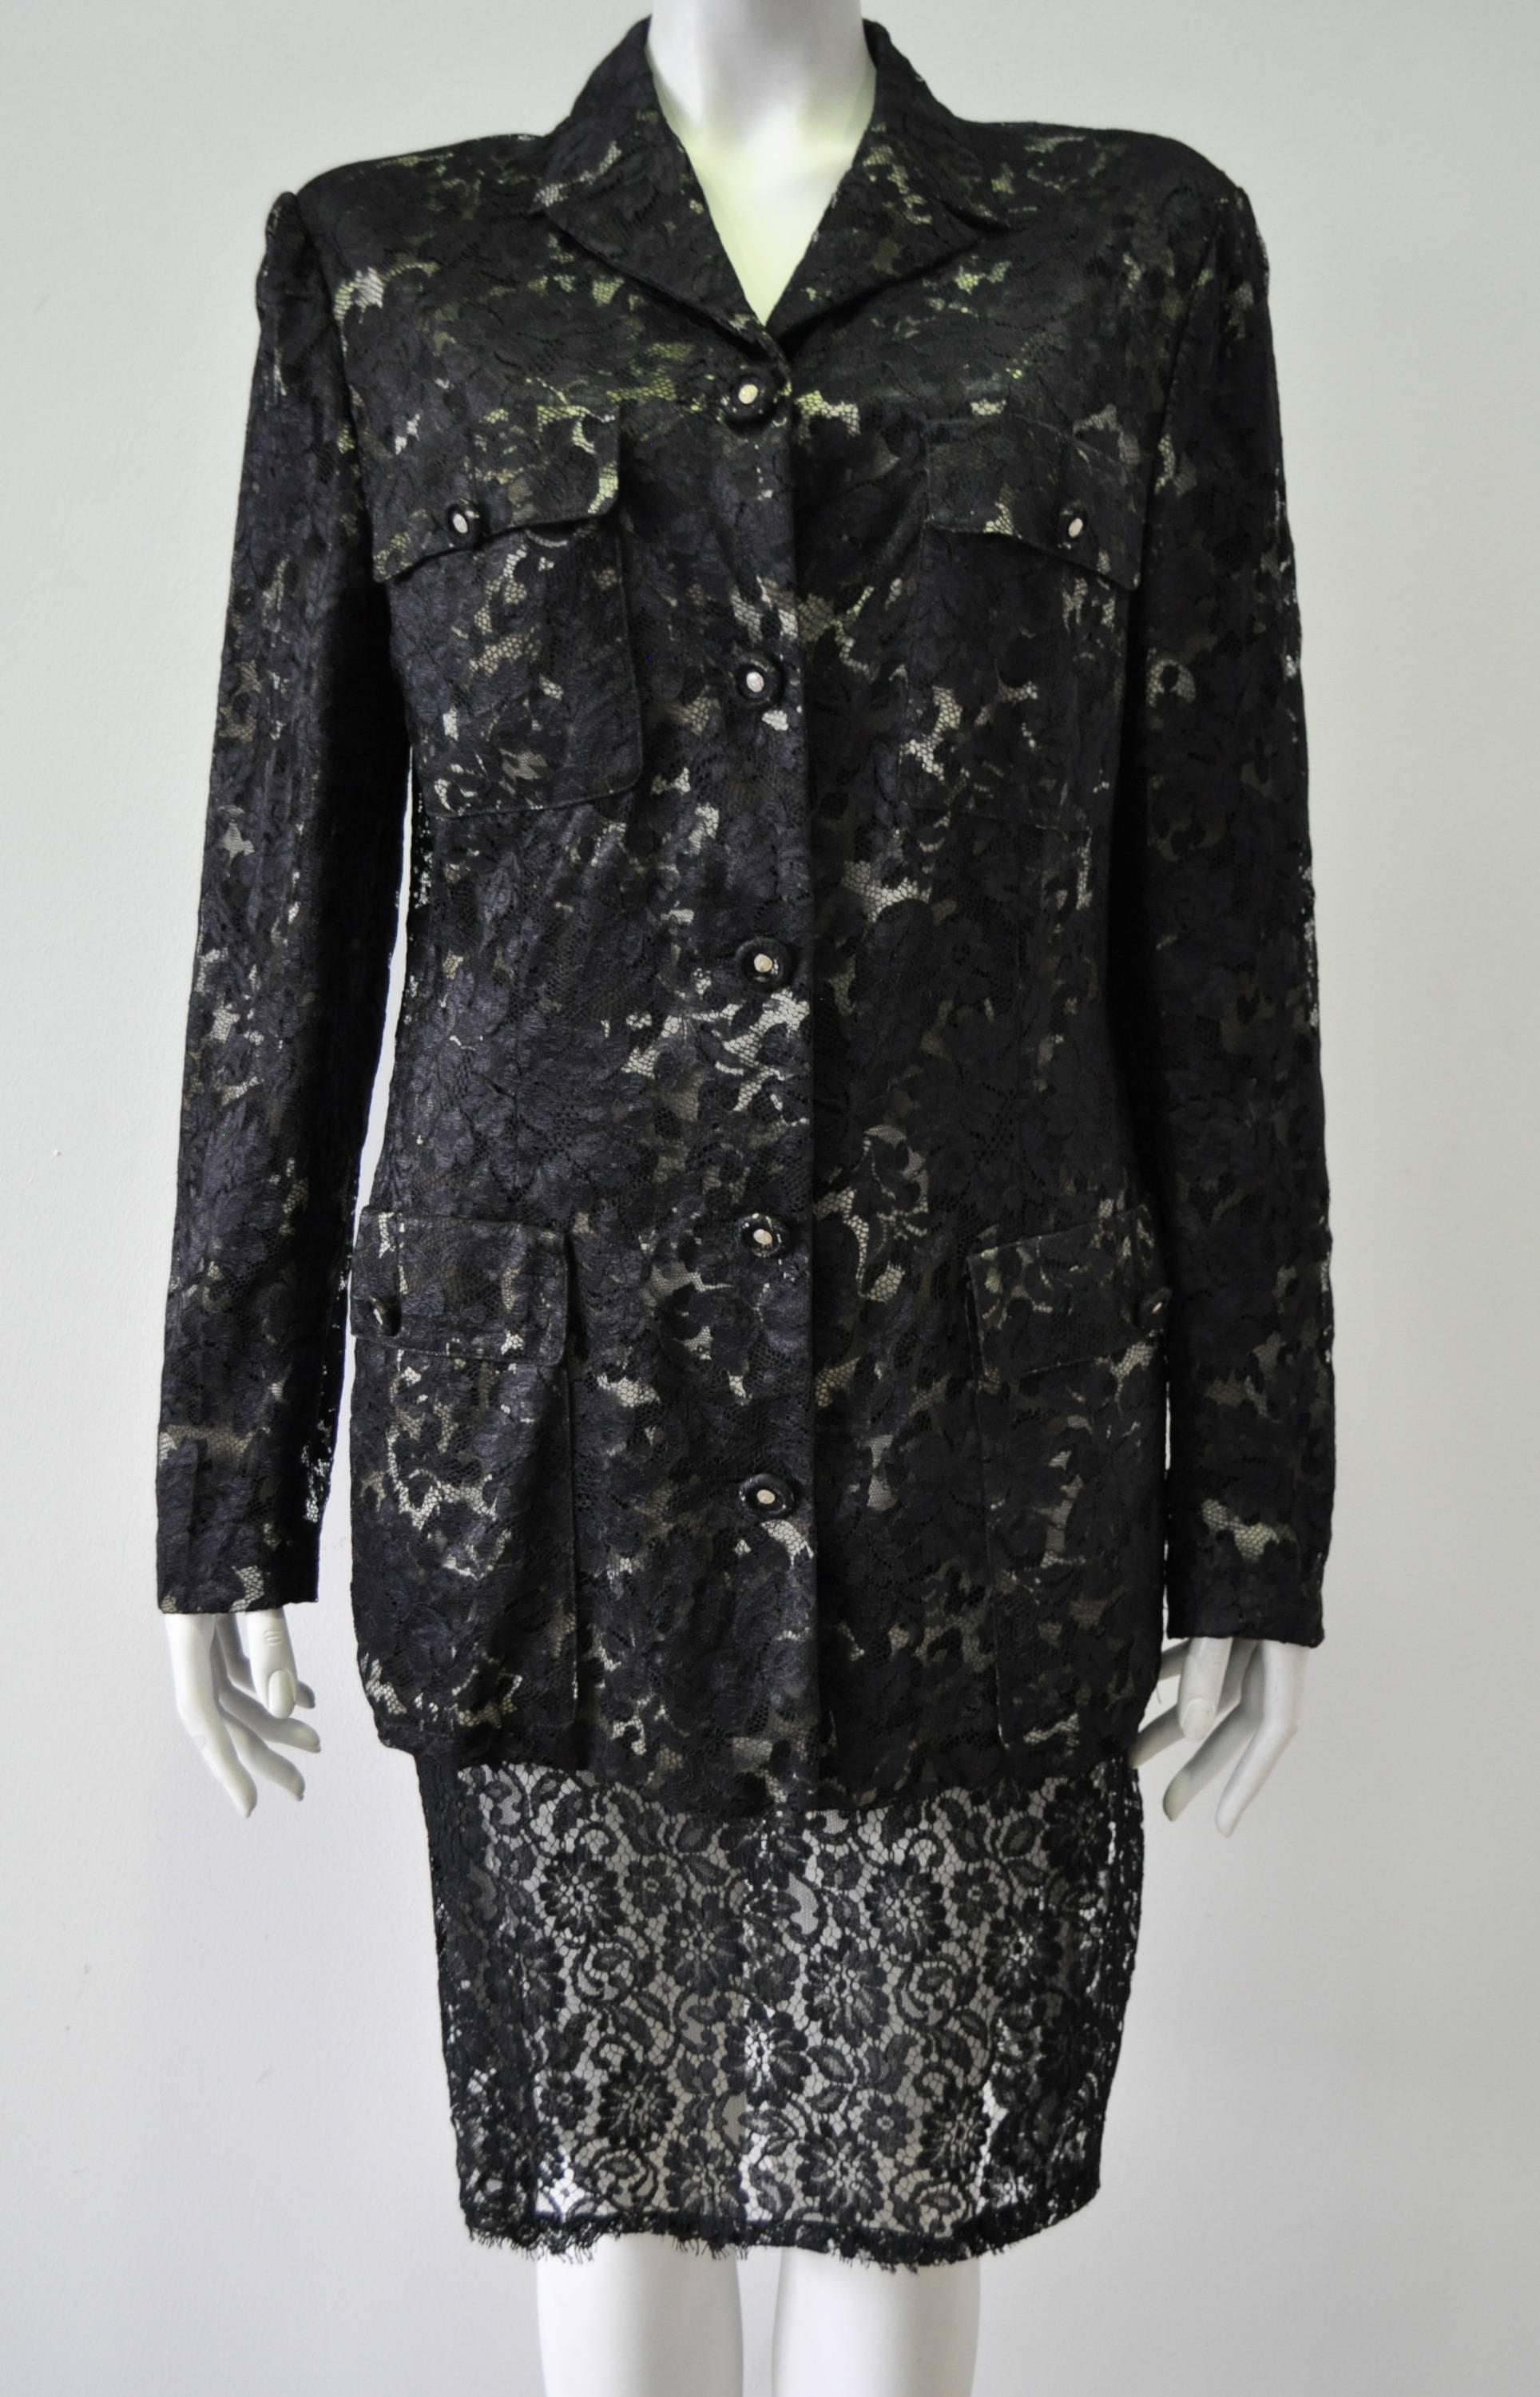 Gianni Versace Istante Lace over Leopard Print Militaire Jacket For Sale 3